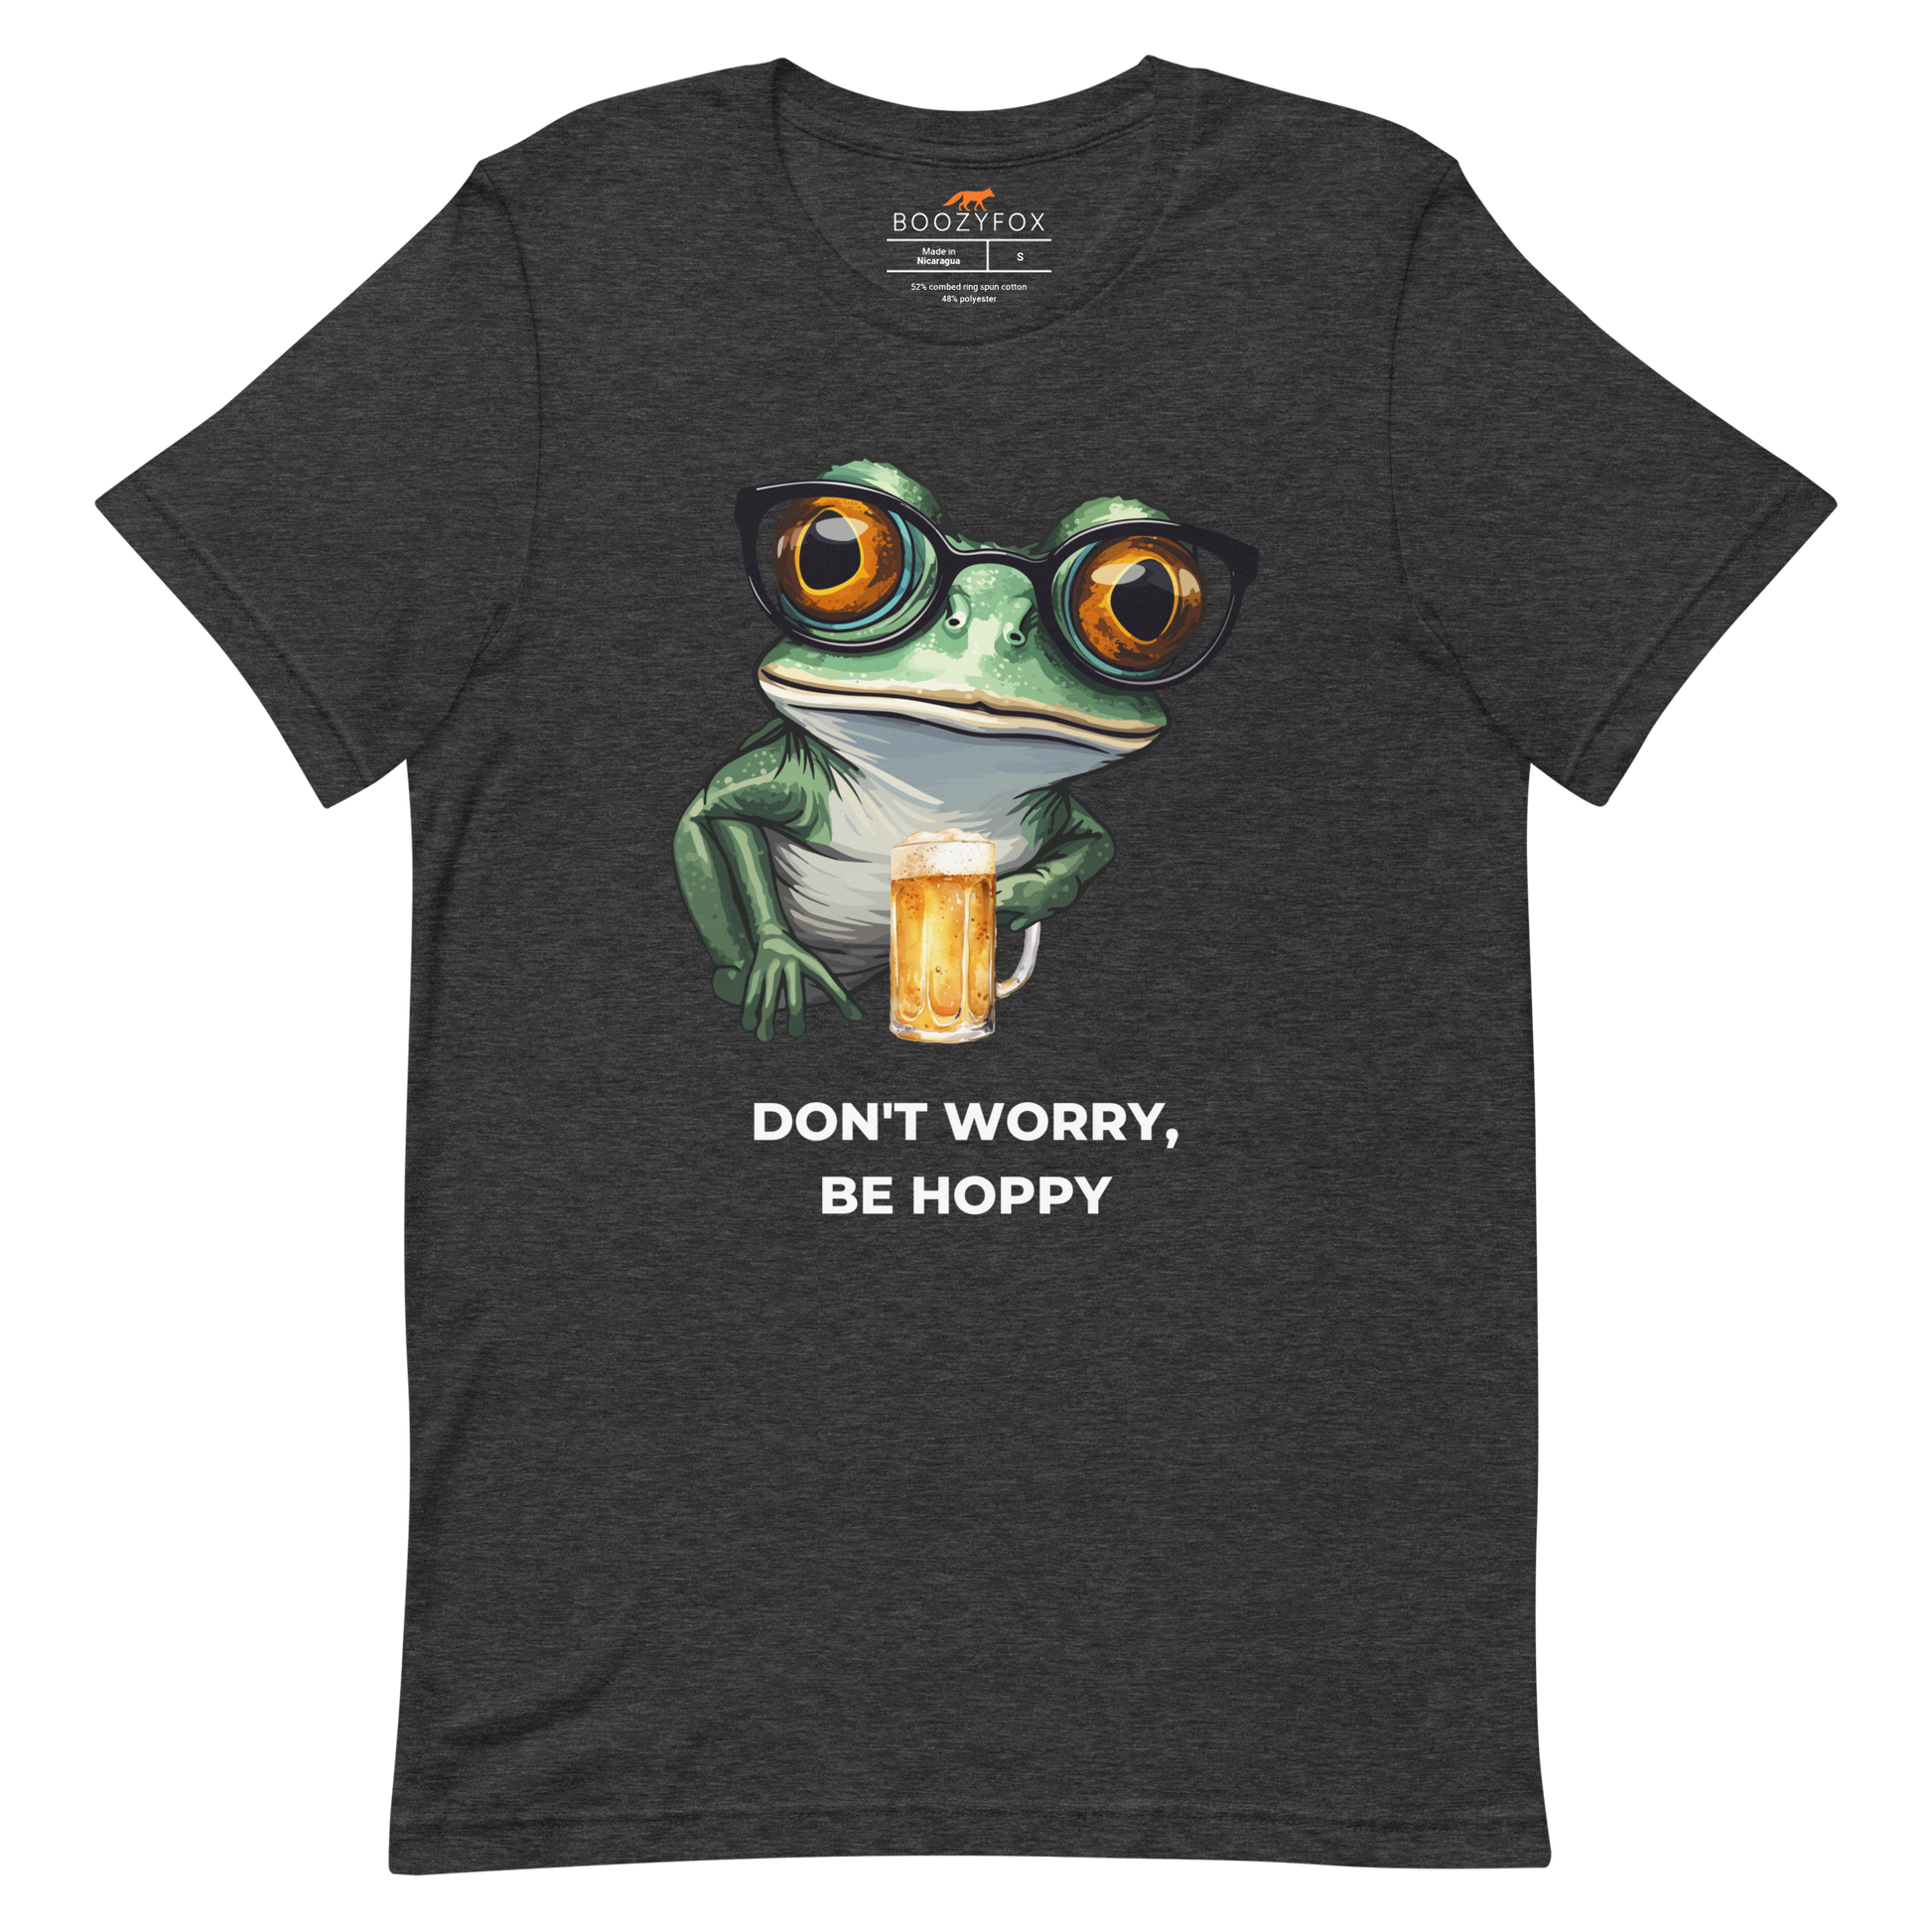 Dark Grey Heather Premium Frog Tee featuring a funny Don't Worry, Be Hoppy graphic on the chest - Funny Graphic Frog Tees - Boozy Fox